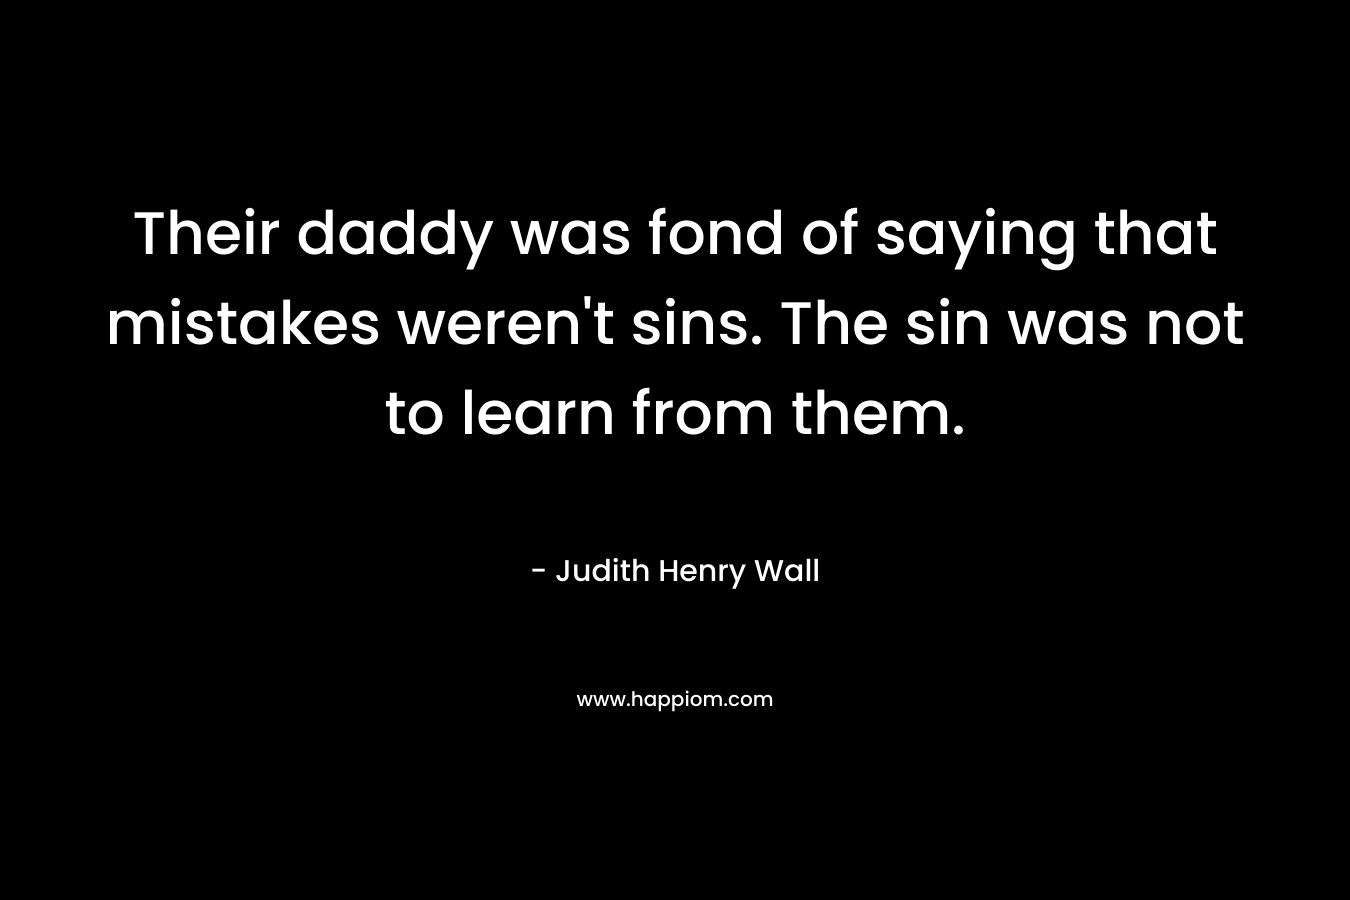 Their daddy was fond of saying that mistakes weren't sins. The sin was not to learn from them.